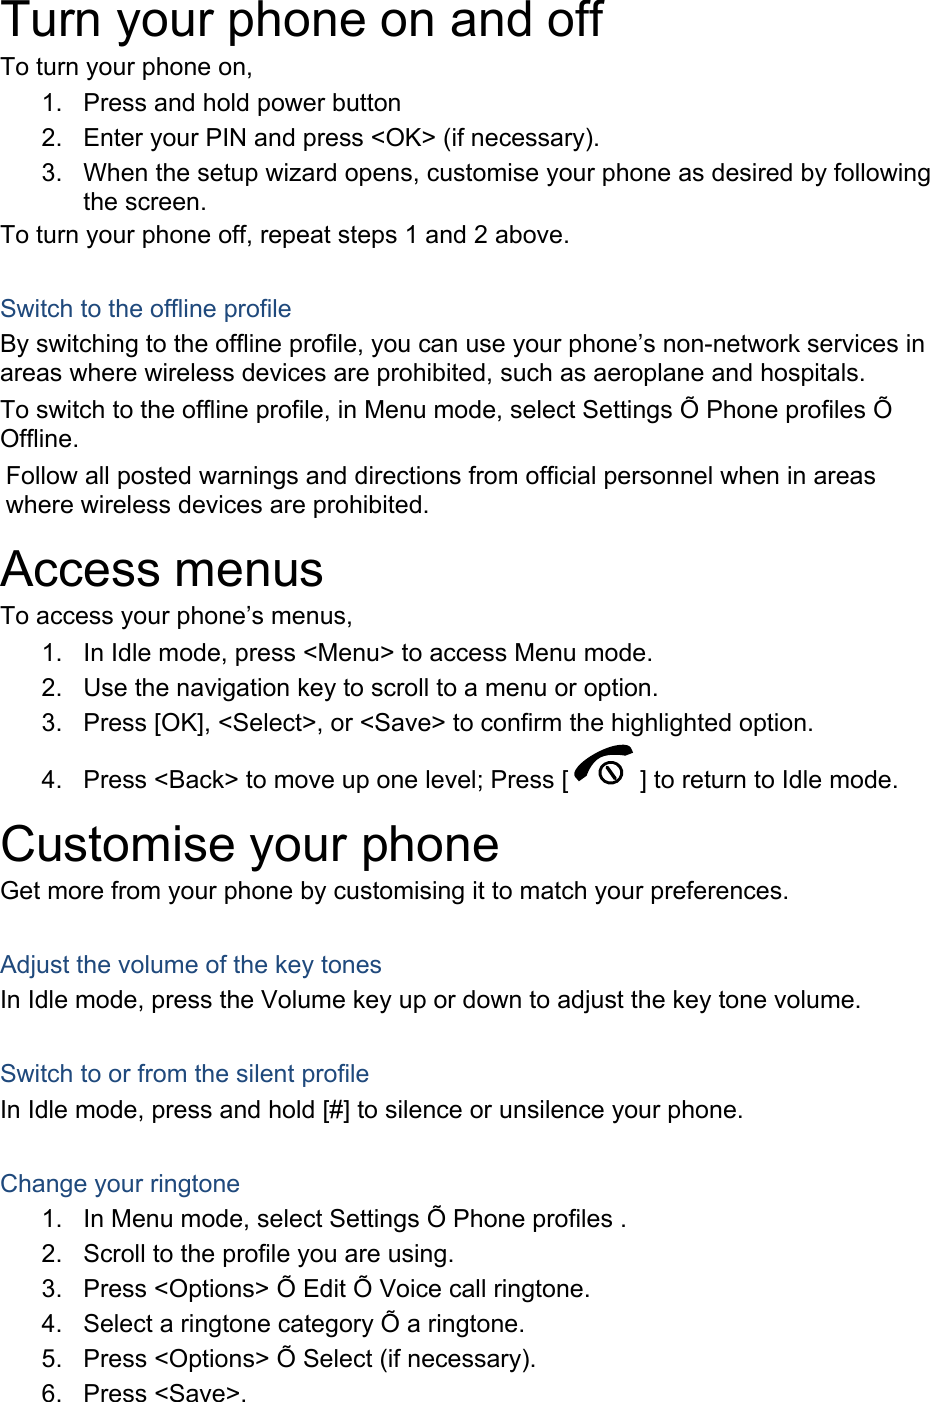 Turn your phone on and off To turn your phone on, 1.  Press and hold power button 2.  Enter your PIN and press &lt;OK&gt; (if necessary). 3.  When the setup wizard opens, customise your phone as desired by following the screen. To turn your phone off, repeat steps 1 and 2 above.  Switch to the offline profile By switching to the offline profile, you can use your phone’s non-network services in areas where wireless devices are prohibited, such as aeroplane and hospitals. To switch to the offline profile, in Menu mode, select Settings Õ Phone profiles Õ Offline. Follow all posted warnings and directions from official personnel when in areas where wireless devices are prohibited. Access menus To access your phone’s menus, 1.  In Idle mode, press &lt;Menu&gt; to access Menu mode. 2.  Use the navigation key to scroll to a menu or option. 3.  Press [OK], &lt;Select&gt;, or &lt;Save&gt; to confirm the highlighted option. 4.  Press &lt;Back&gt; to move up one level; Press [ ] to return to Idle mode. Customise your phone Get more from your phone by customising it to match your preferences.  Adjust the volume of the key tones In Idle mode, press the Volume key up or down to adjust the key tone volume.  Switch to or from the silent profile In Idle mode, press and hold [#] to silence or unsilence your phone.  Change your ringtone 1.  In Menu mode, select Settings Õ Phone profiles . 2.  Scroll to the profile you are using. 3.  Press &lt;Options&gt; Õ Edit Õ Voice call ringtone. 4.  Select a ringtone category Õ a ringtone. 5.  Press &lt;Options&gt; Õ Select (if necessary). 6. Press &lt;Save&gt;. 